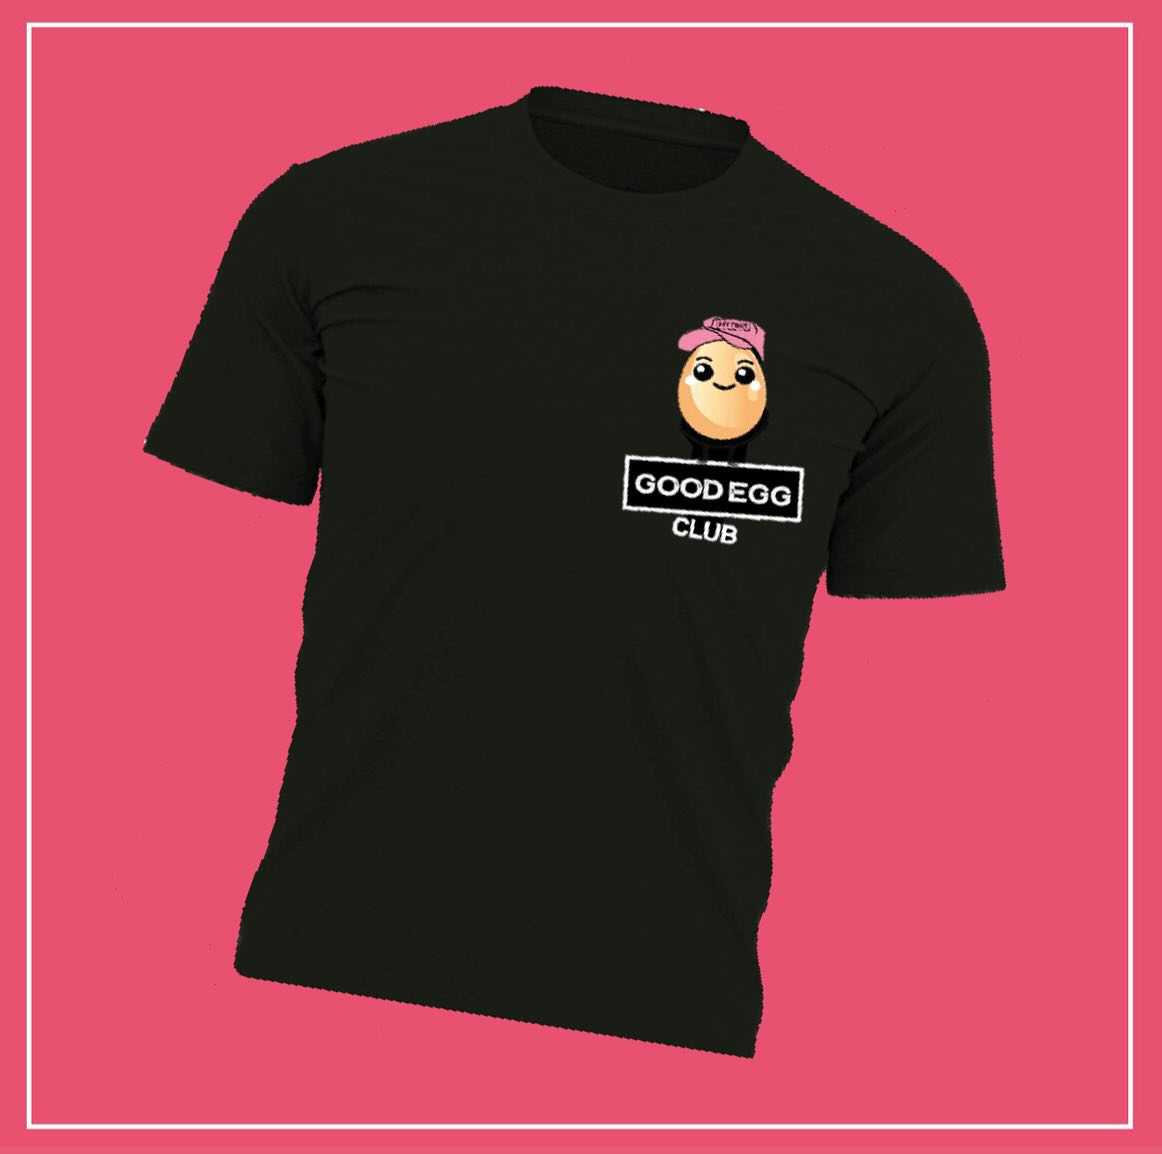 🍳Join the MYTIME Young Carers Good Egg Club and make a meaningful impact in your community 🍳 For just £15 a month, you'll help support our work and you’ll receive your very own eggsclusive Good Egg t-shirt. Sign up here: buy.stripe.com/aEU14a7zPbEN7e…🥚